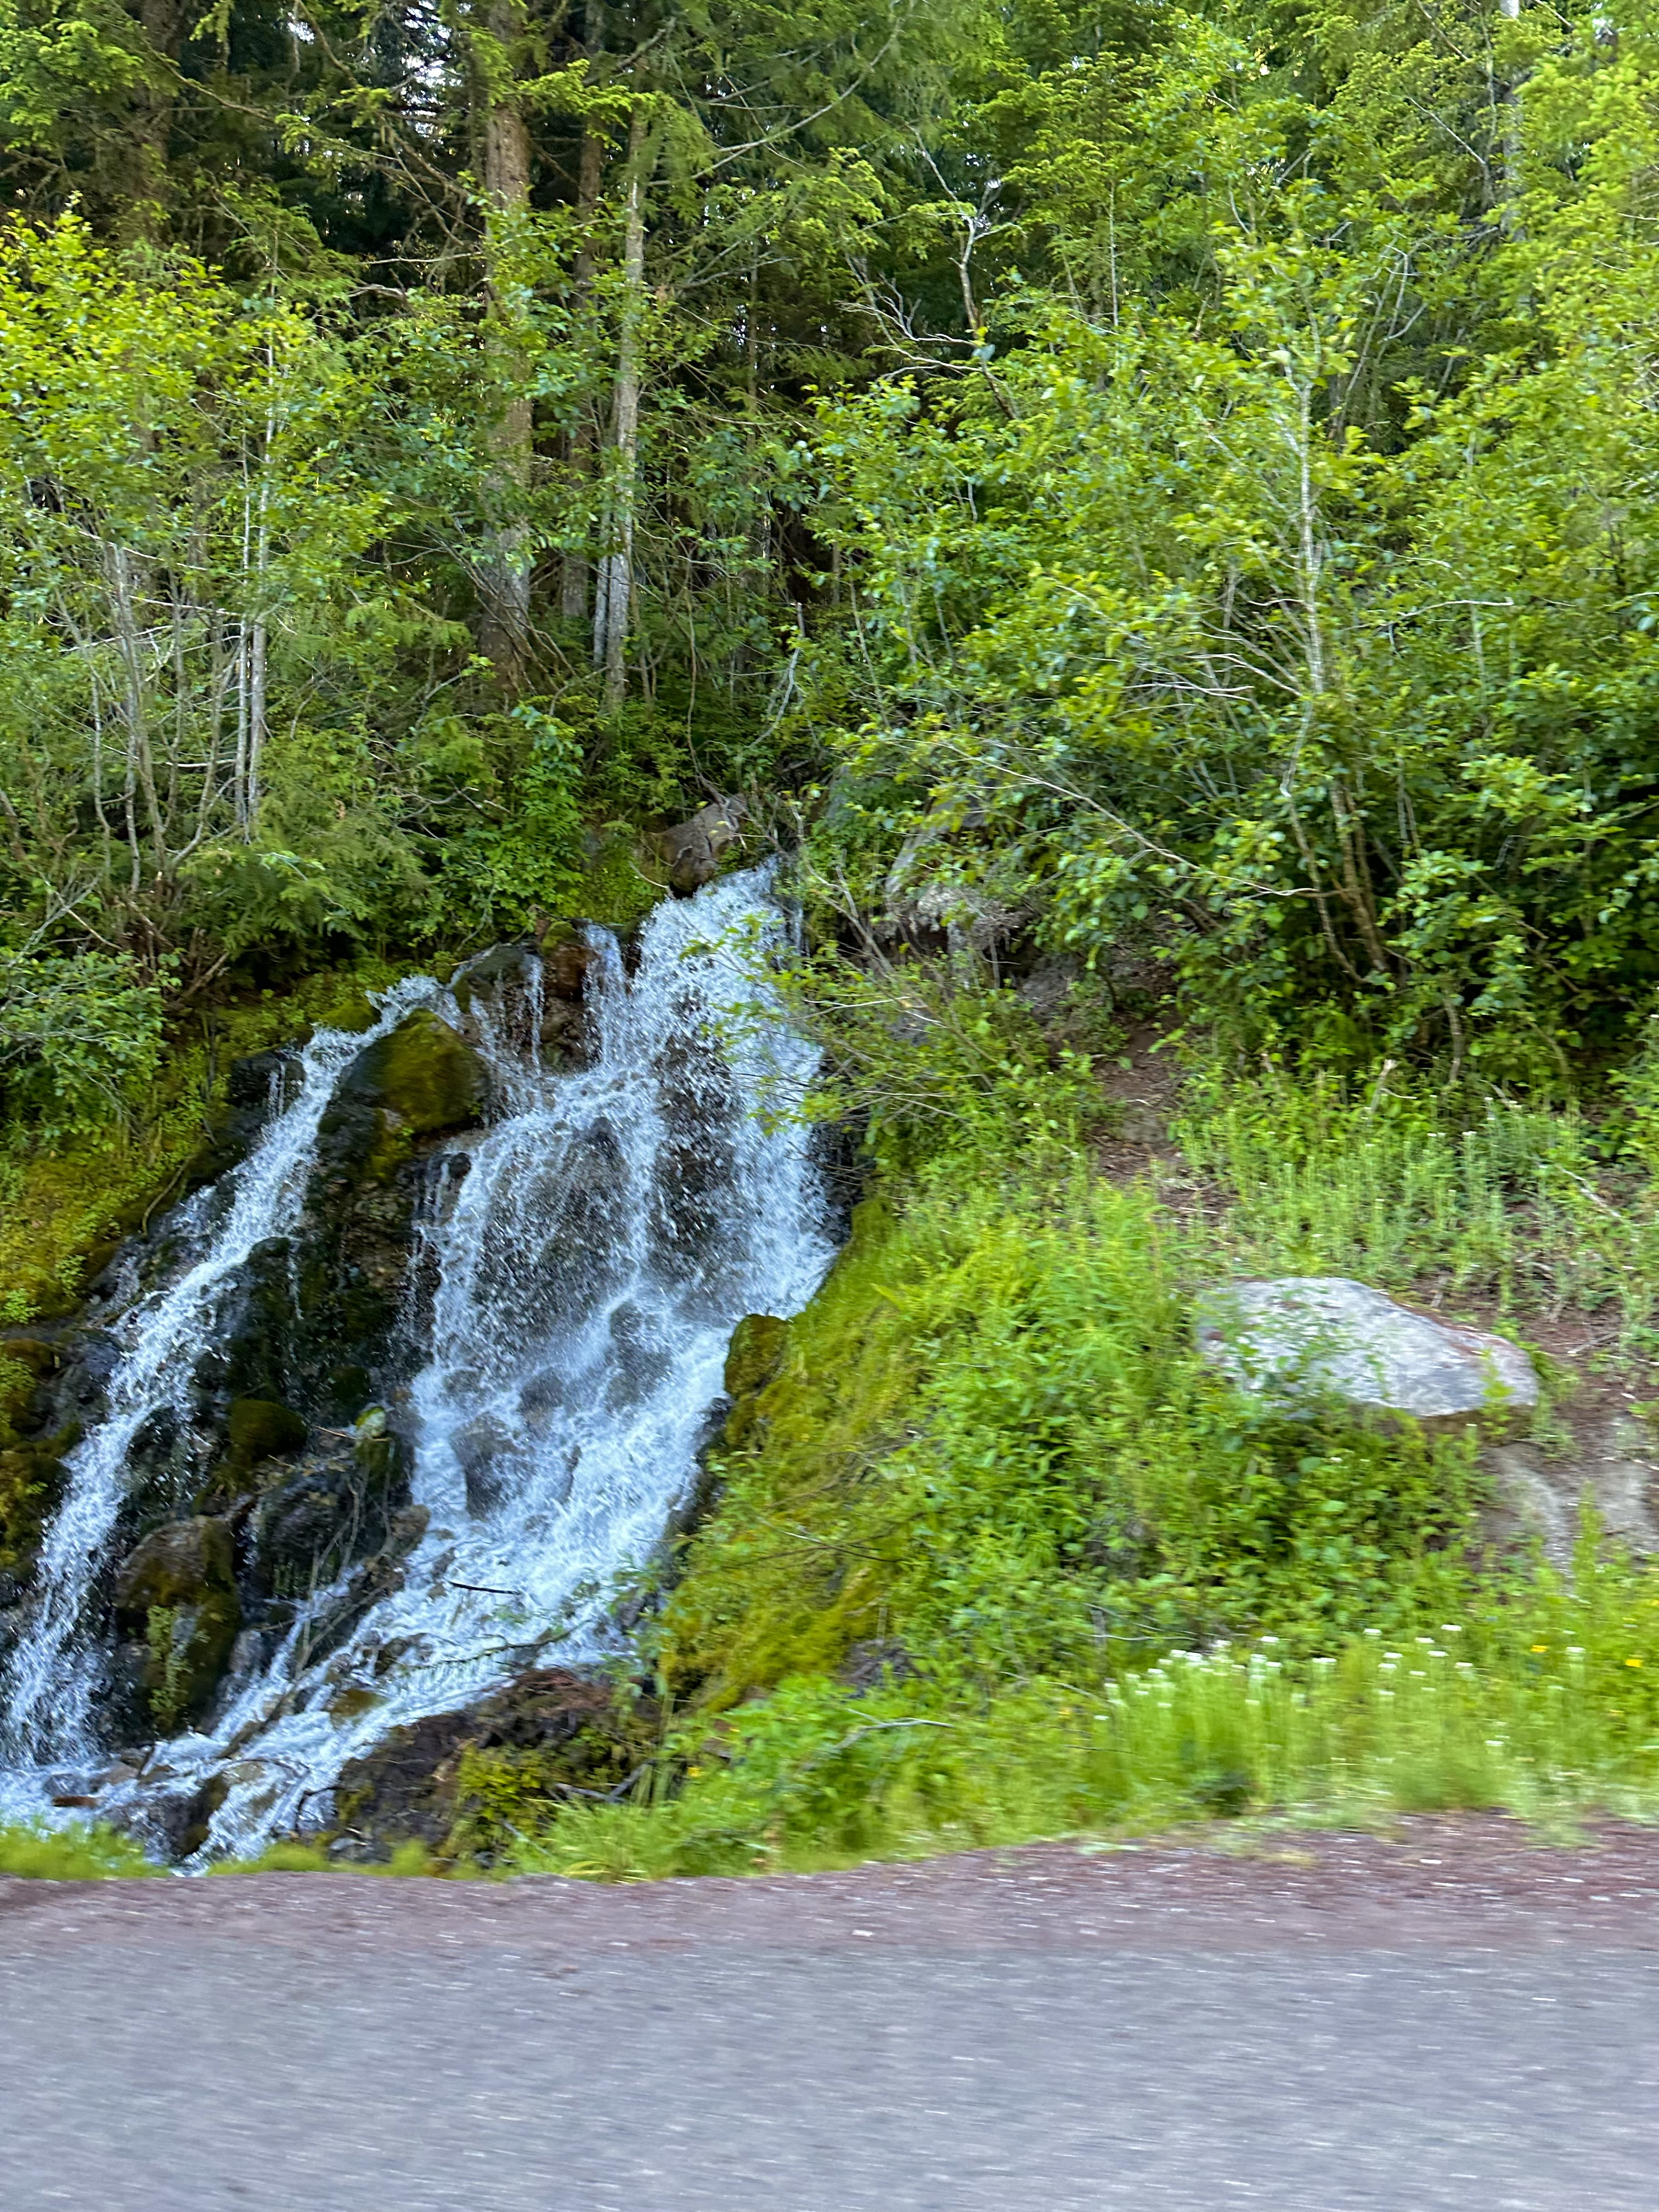 This is a photo of a waterfall in Oregon